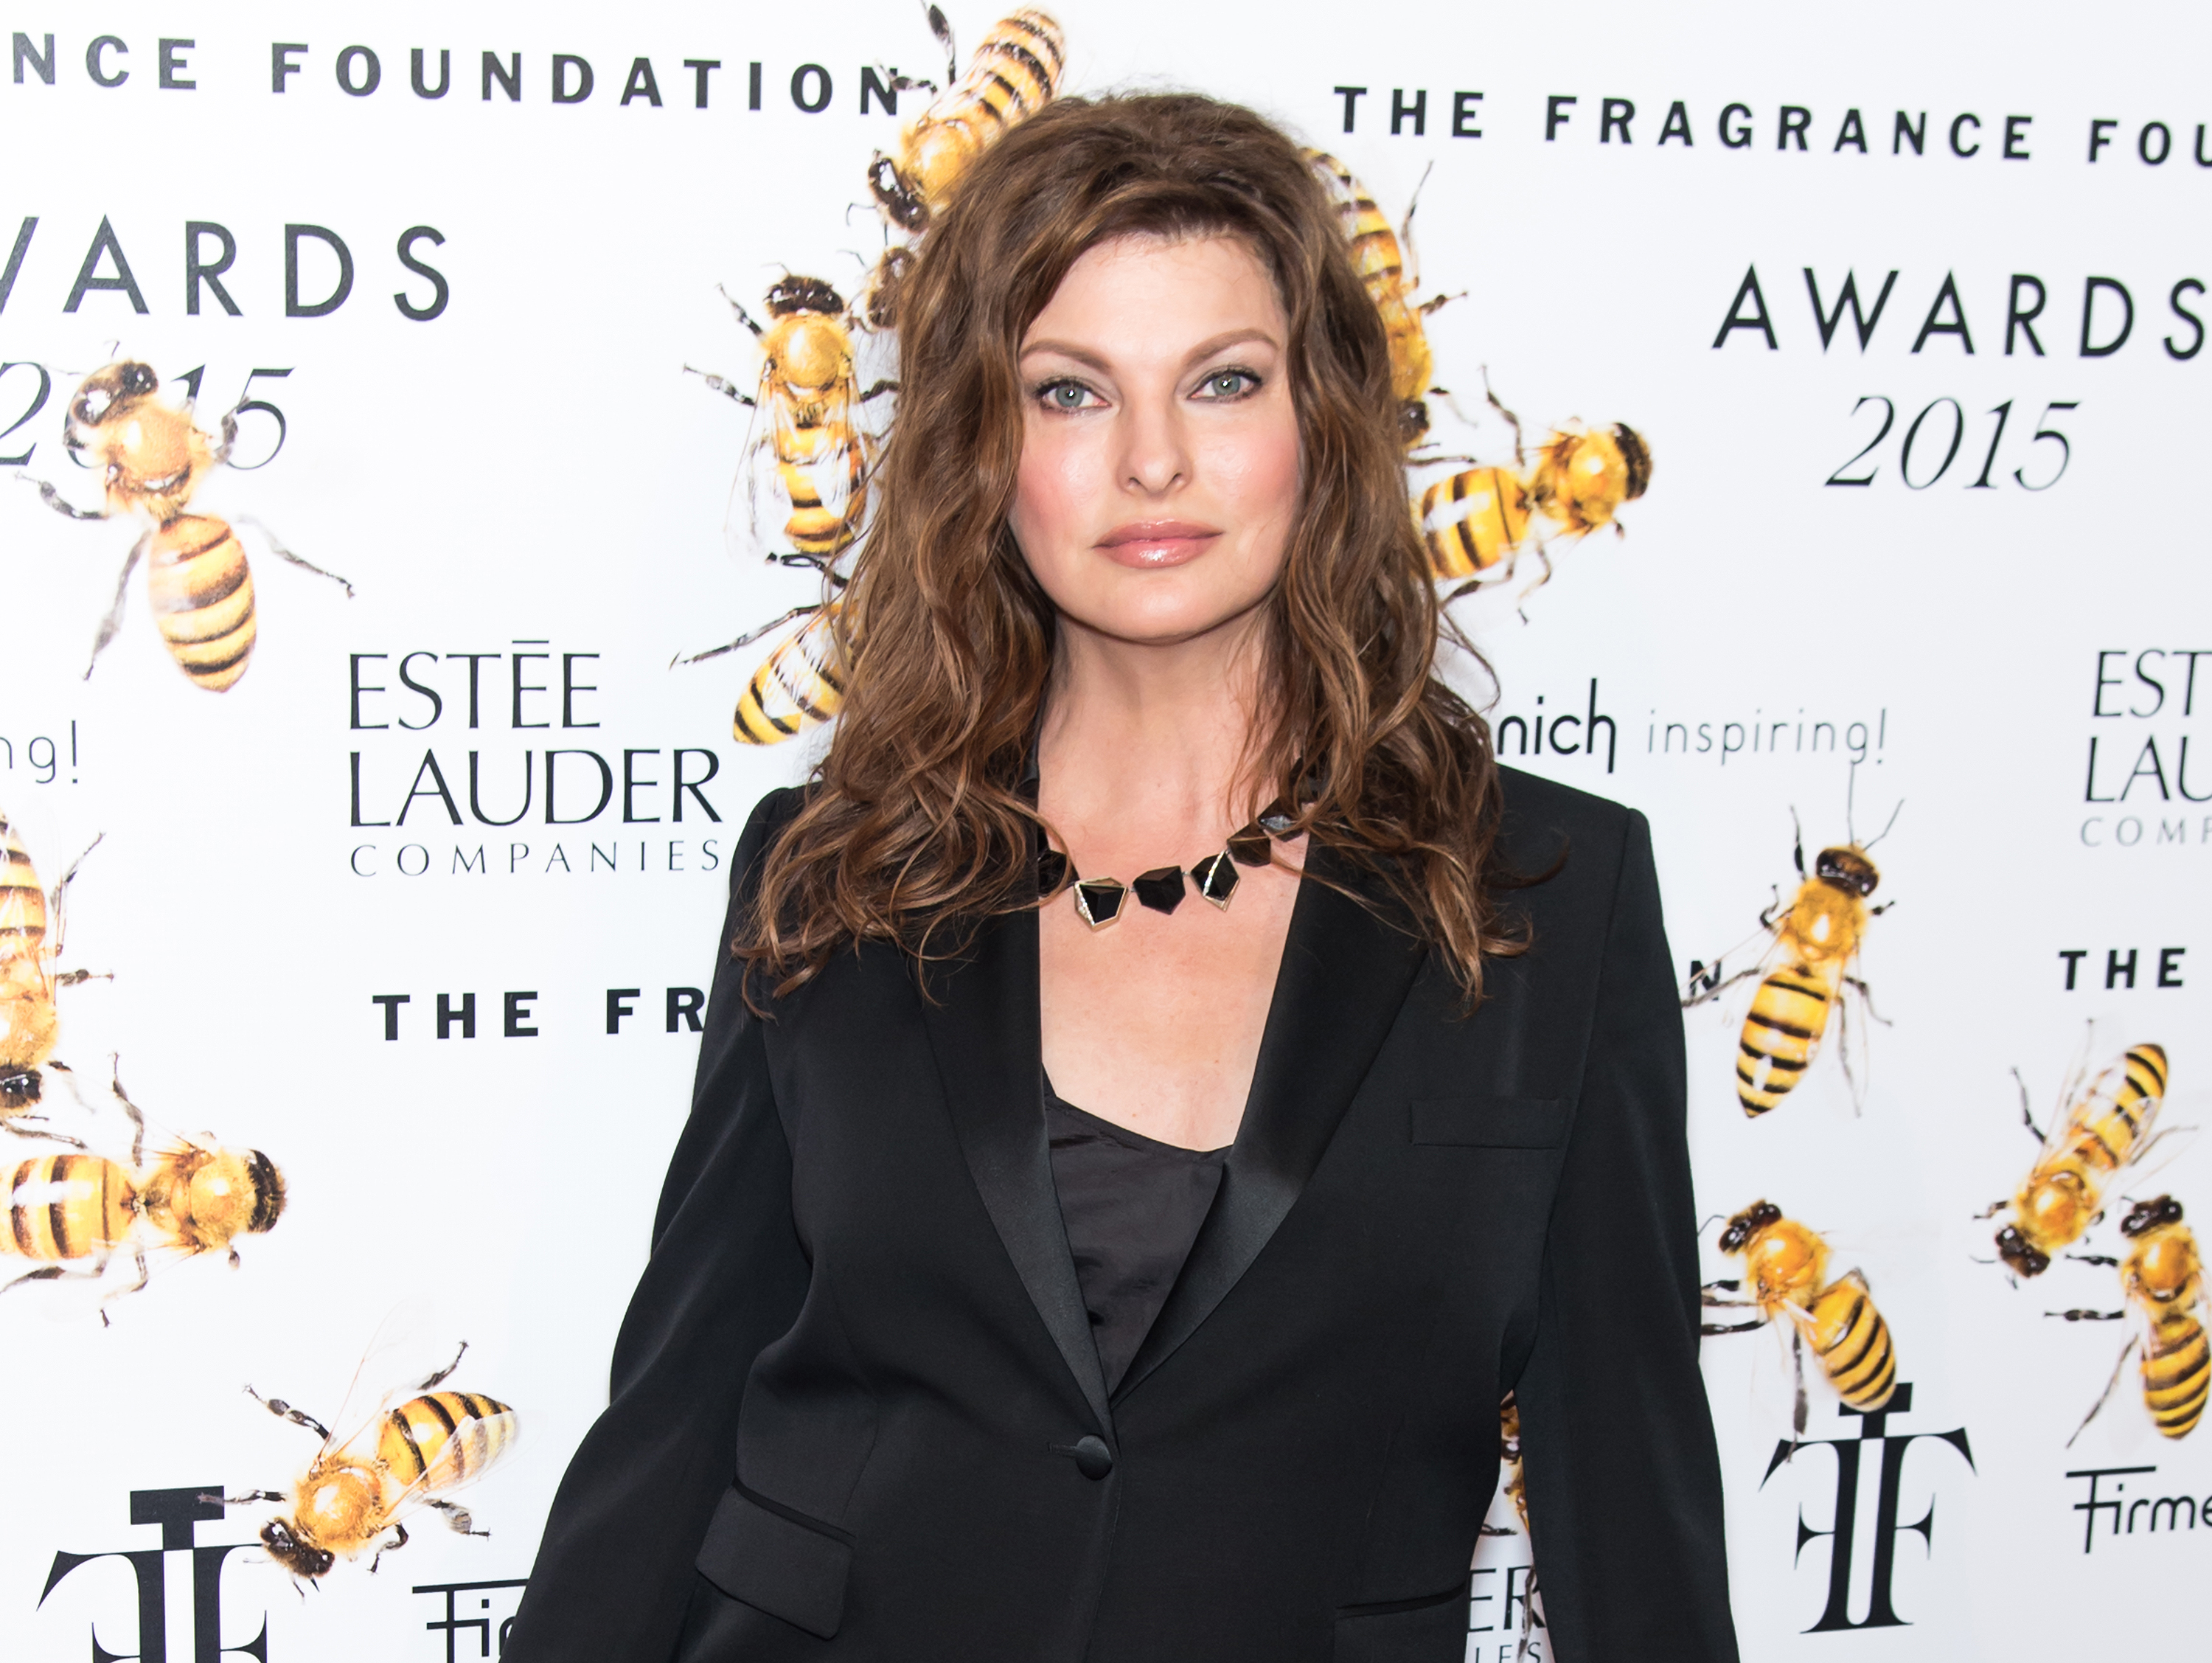 Linda Evangelista attends the 2015 Fragrance Foundation Awards at Alice Tully Hall at Lincoln Center on June 17, 2015, in New York City. | Source: Getty Images